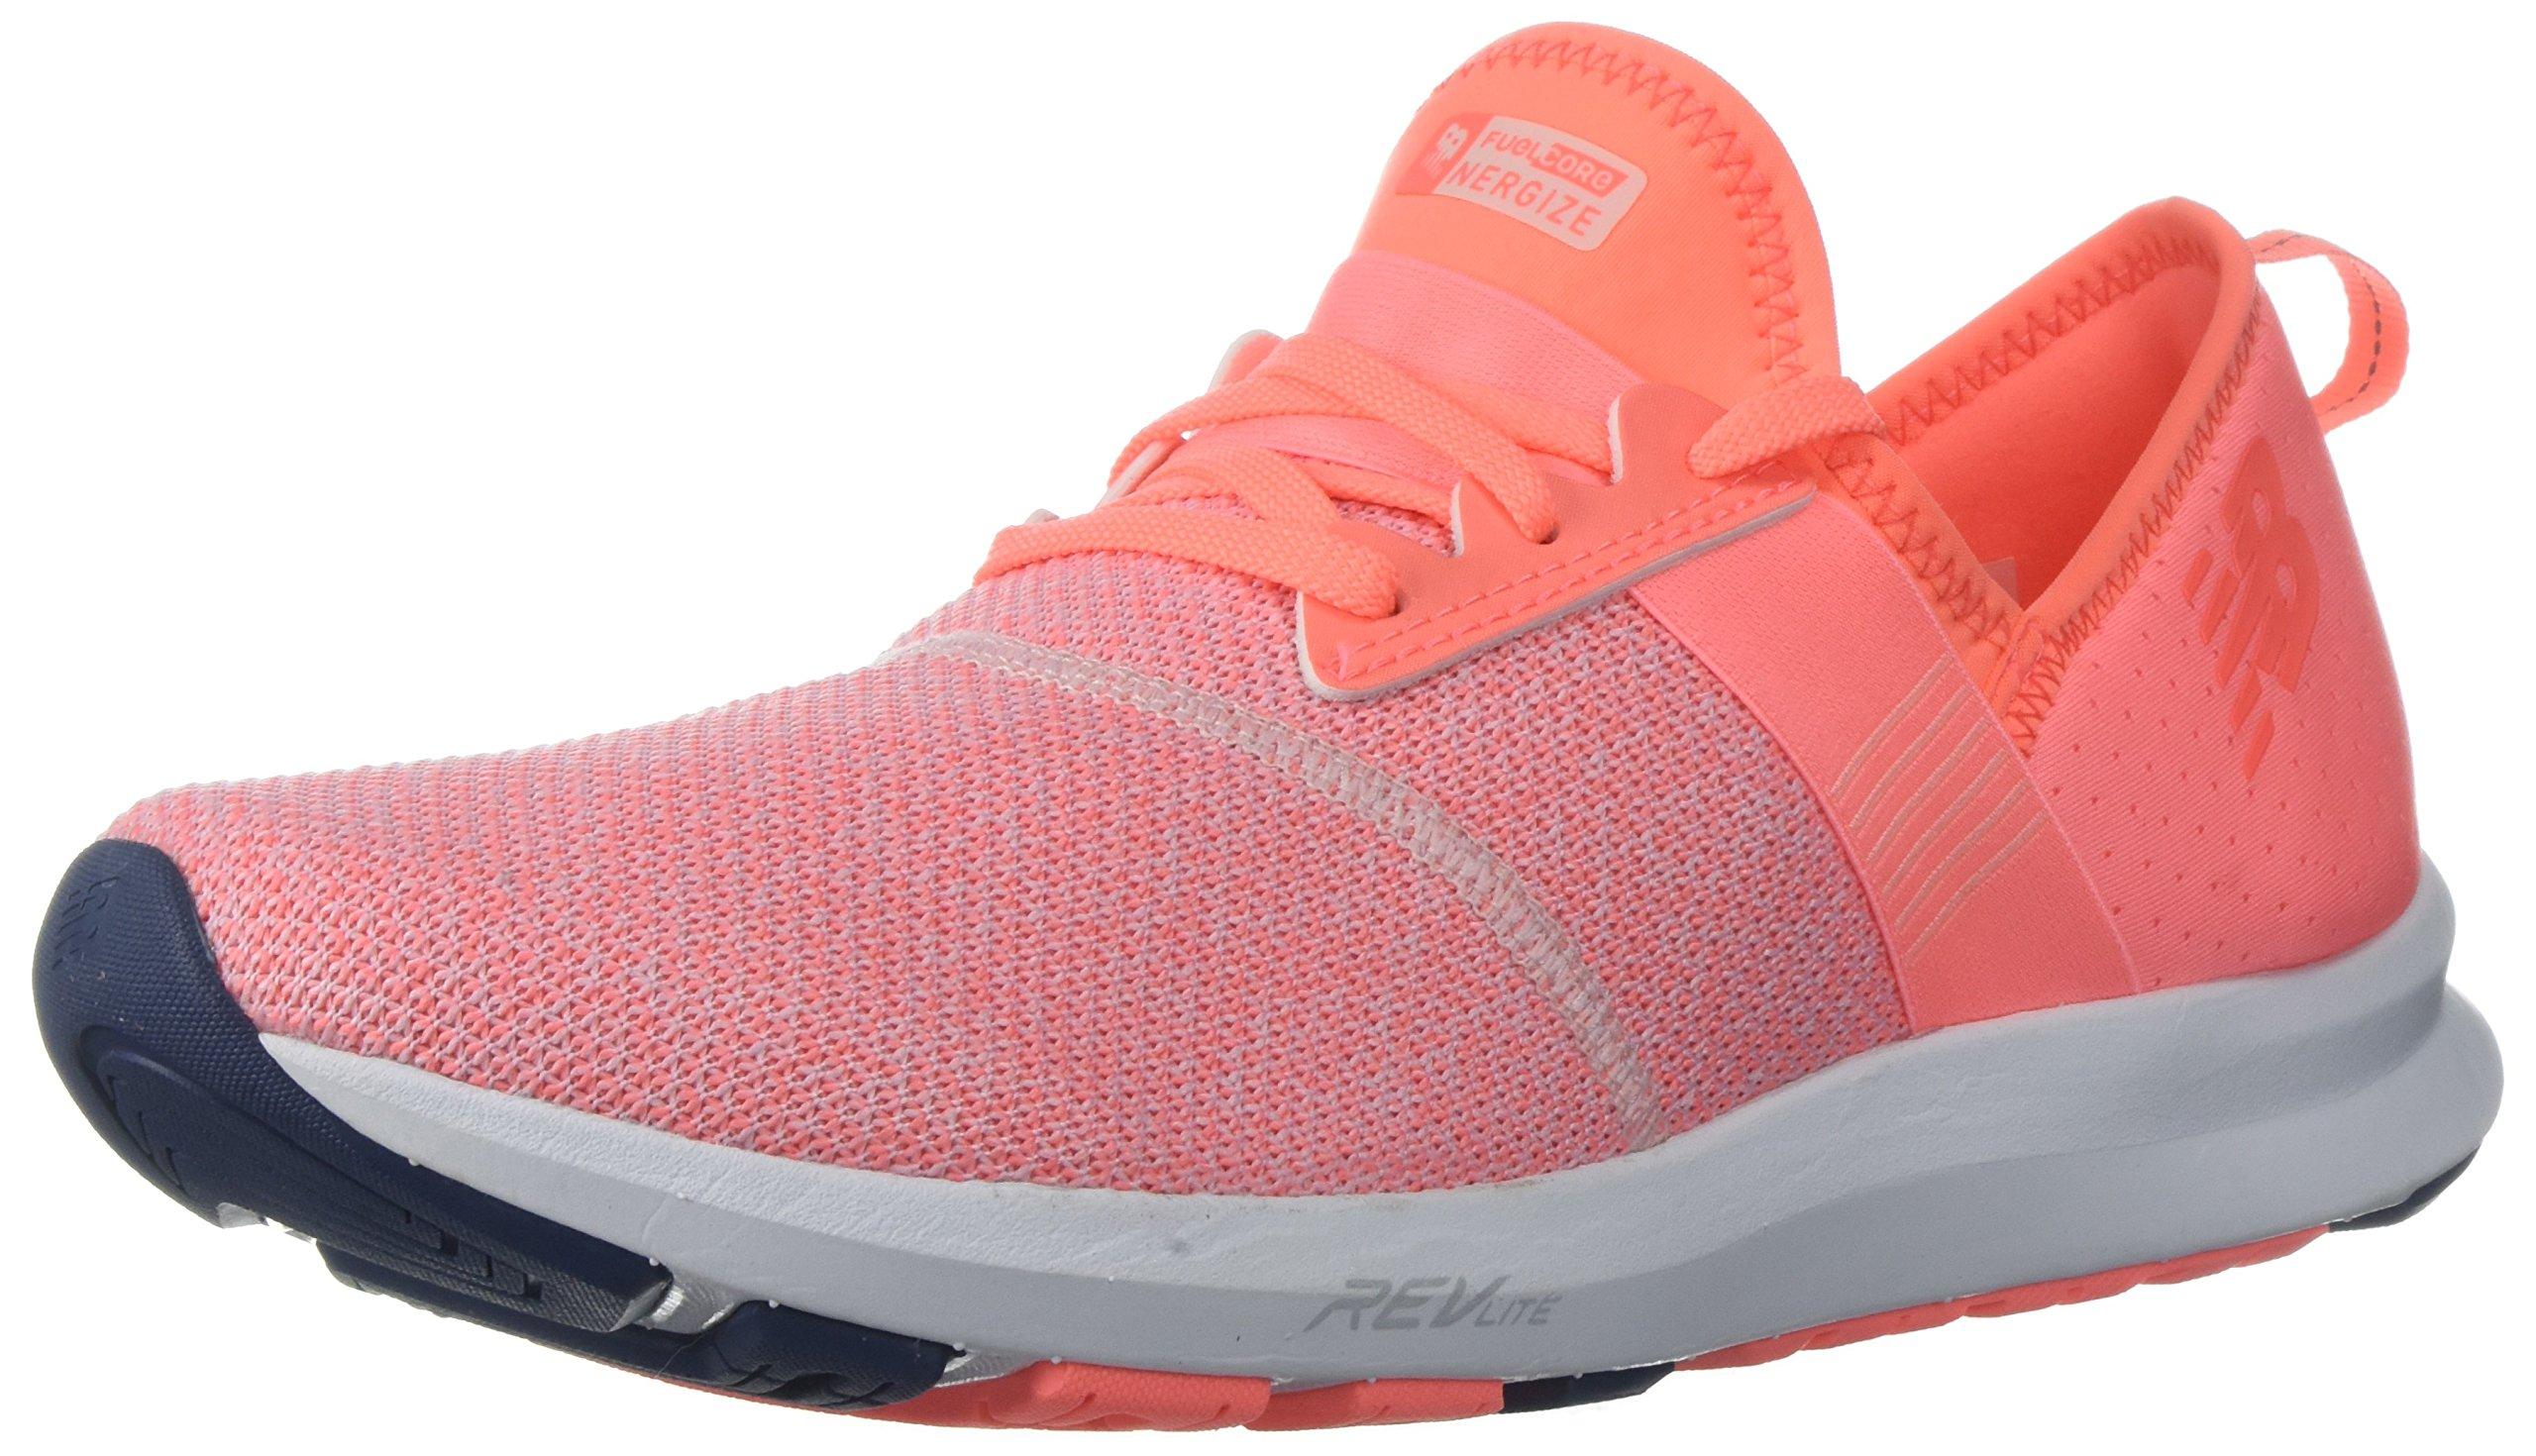 New Balance Fuelcore Nergize V1 Sneaker in Pink - Lyst